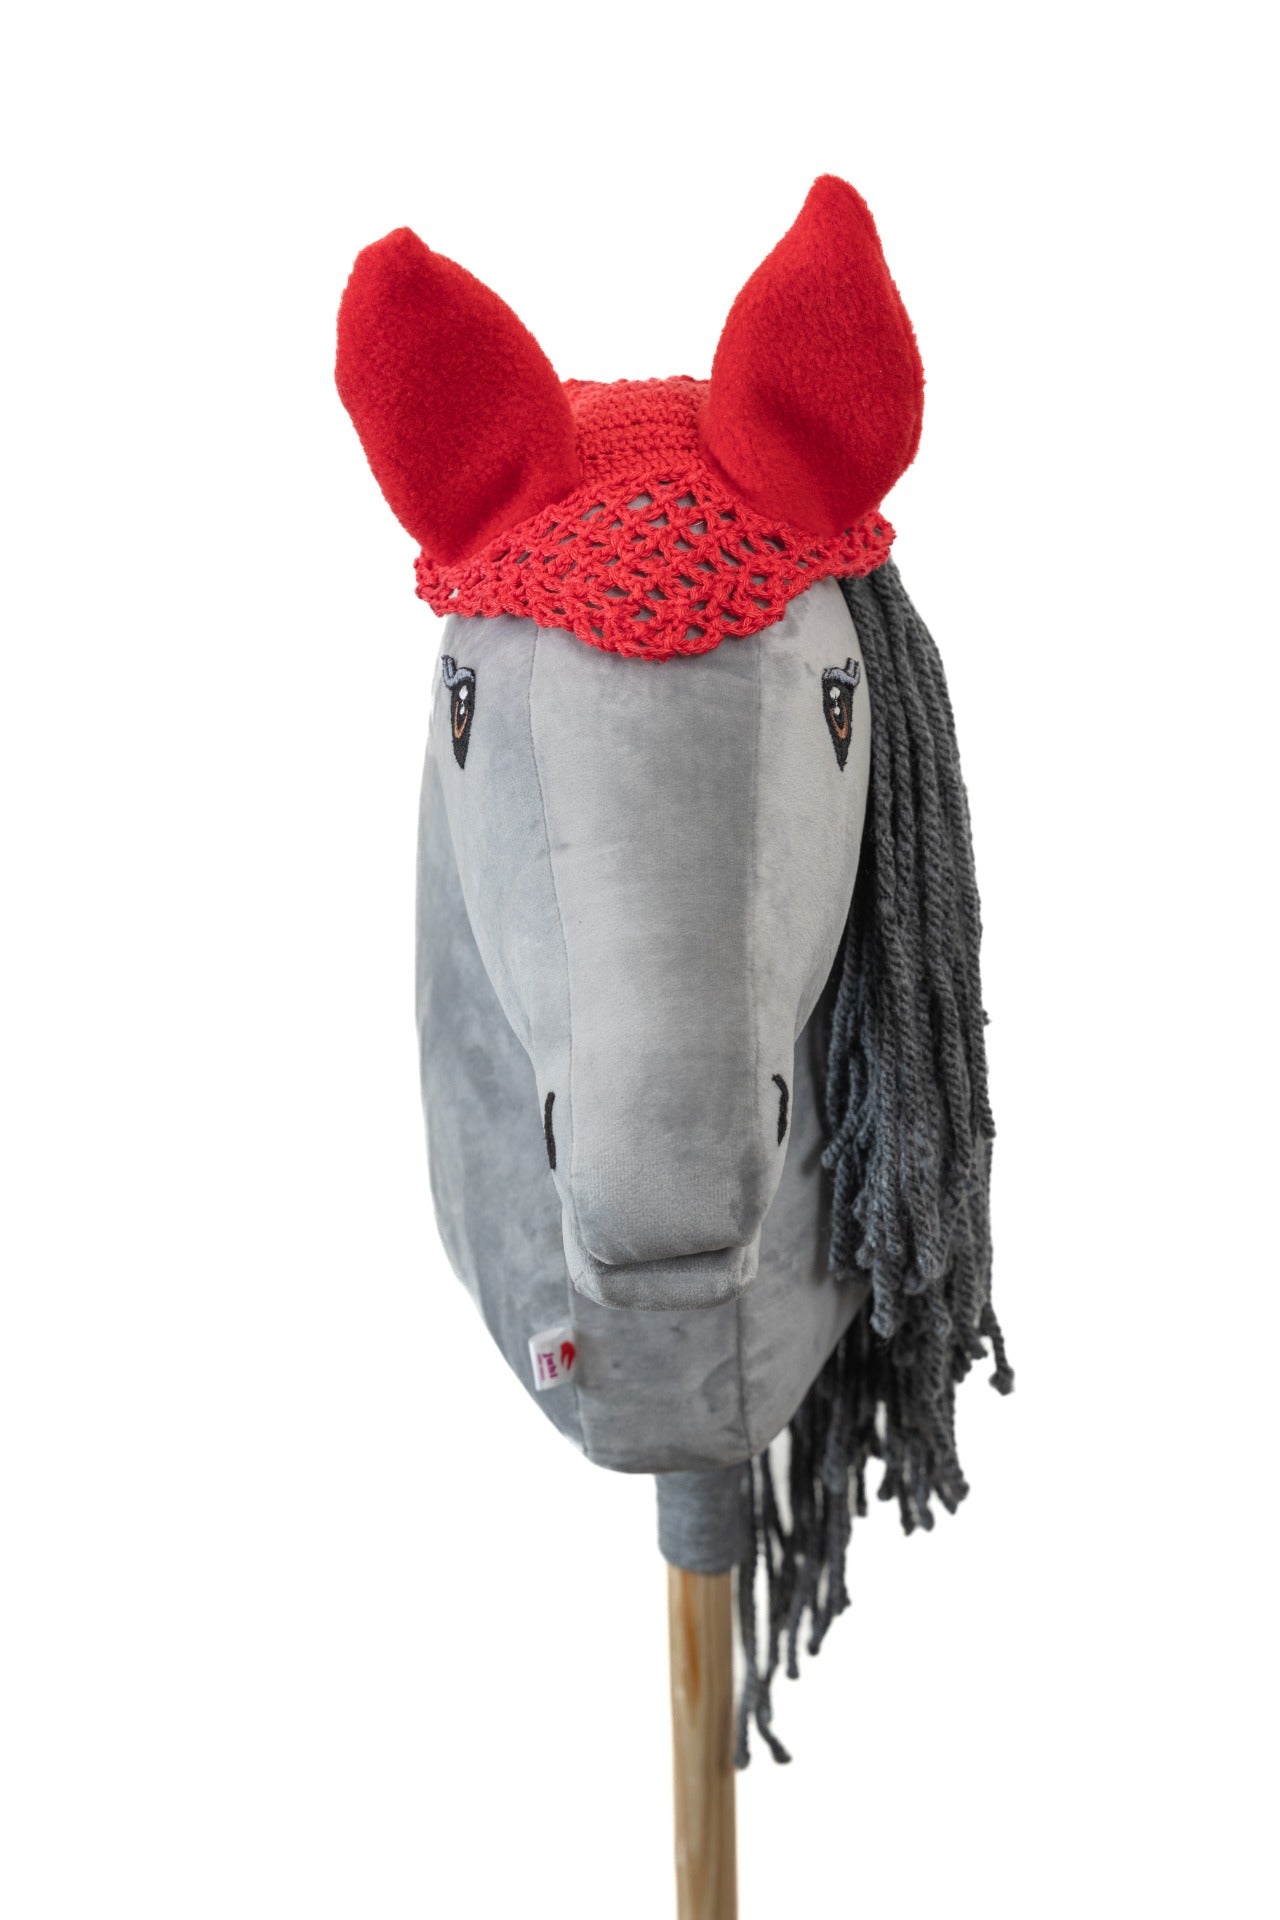 Ear net crocheted - Red with red ears - Adult horse